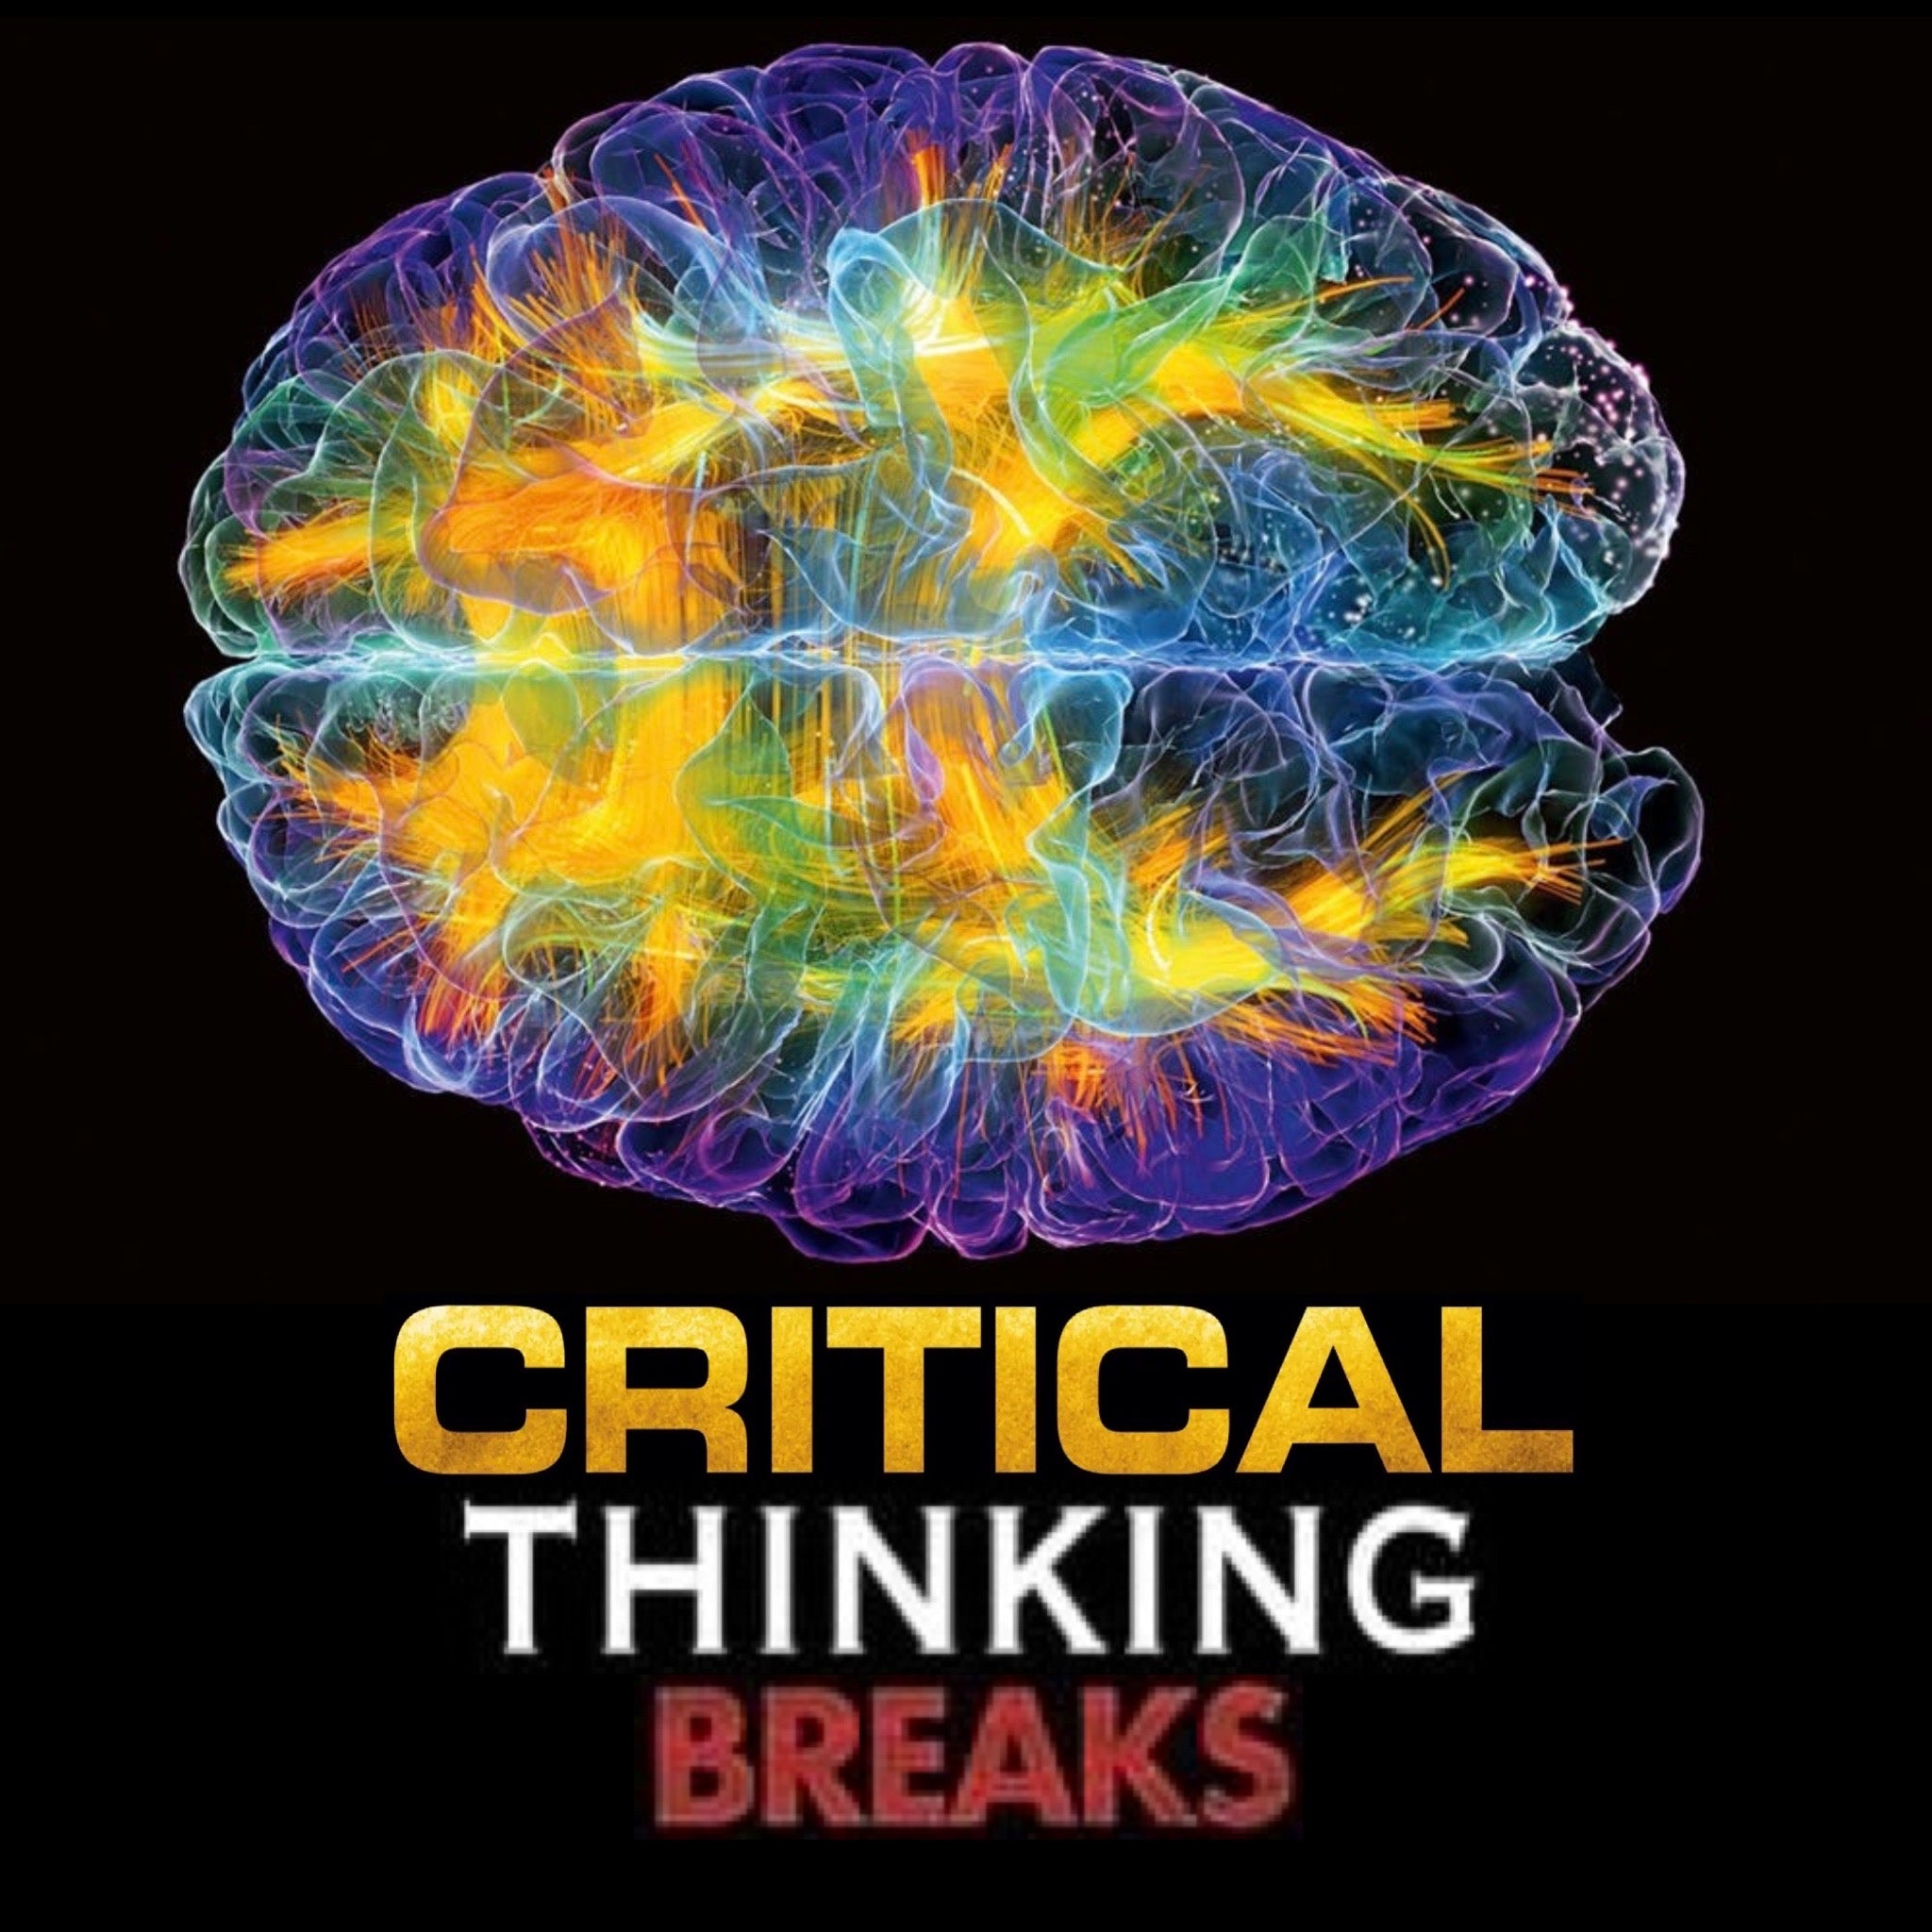 37 CRITICAL THINKING BREAKS Unreleased DIRT STYLE Digital Record Download!